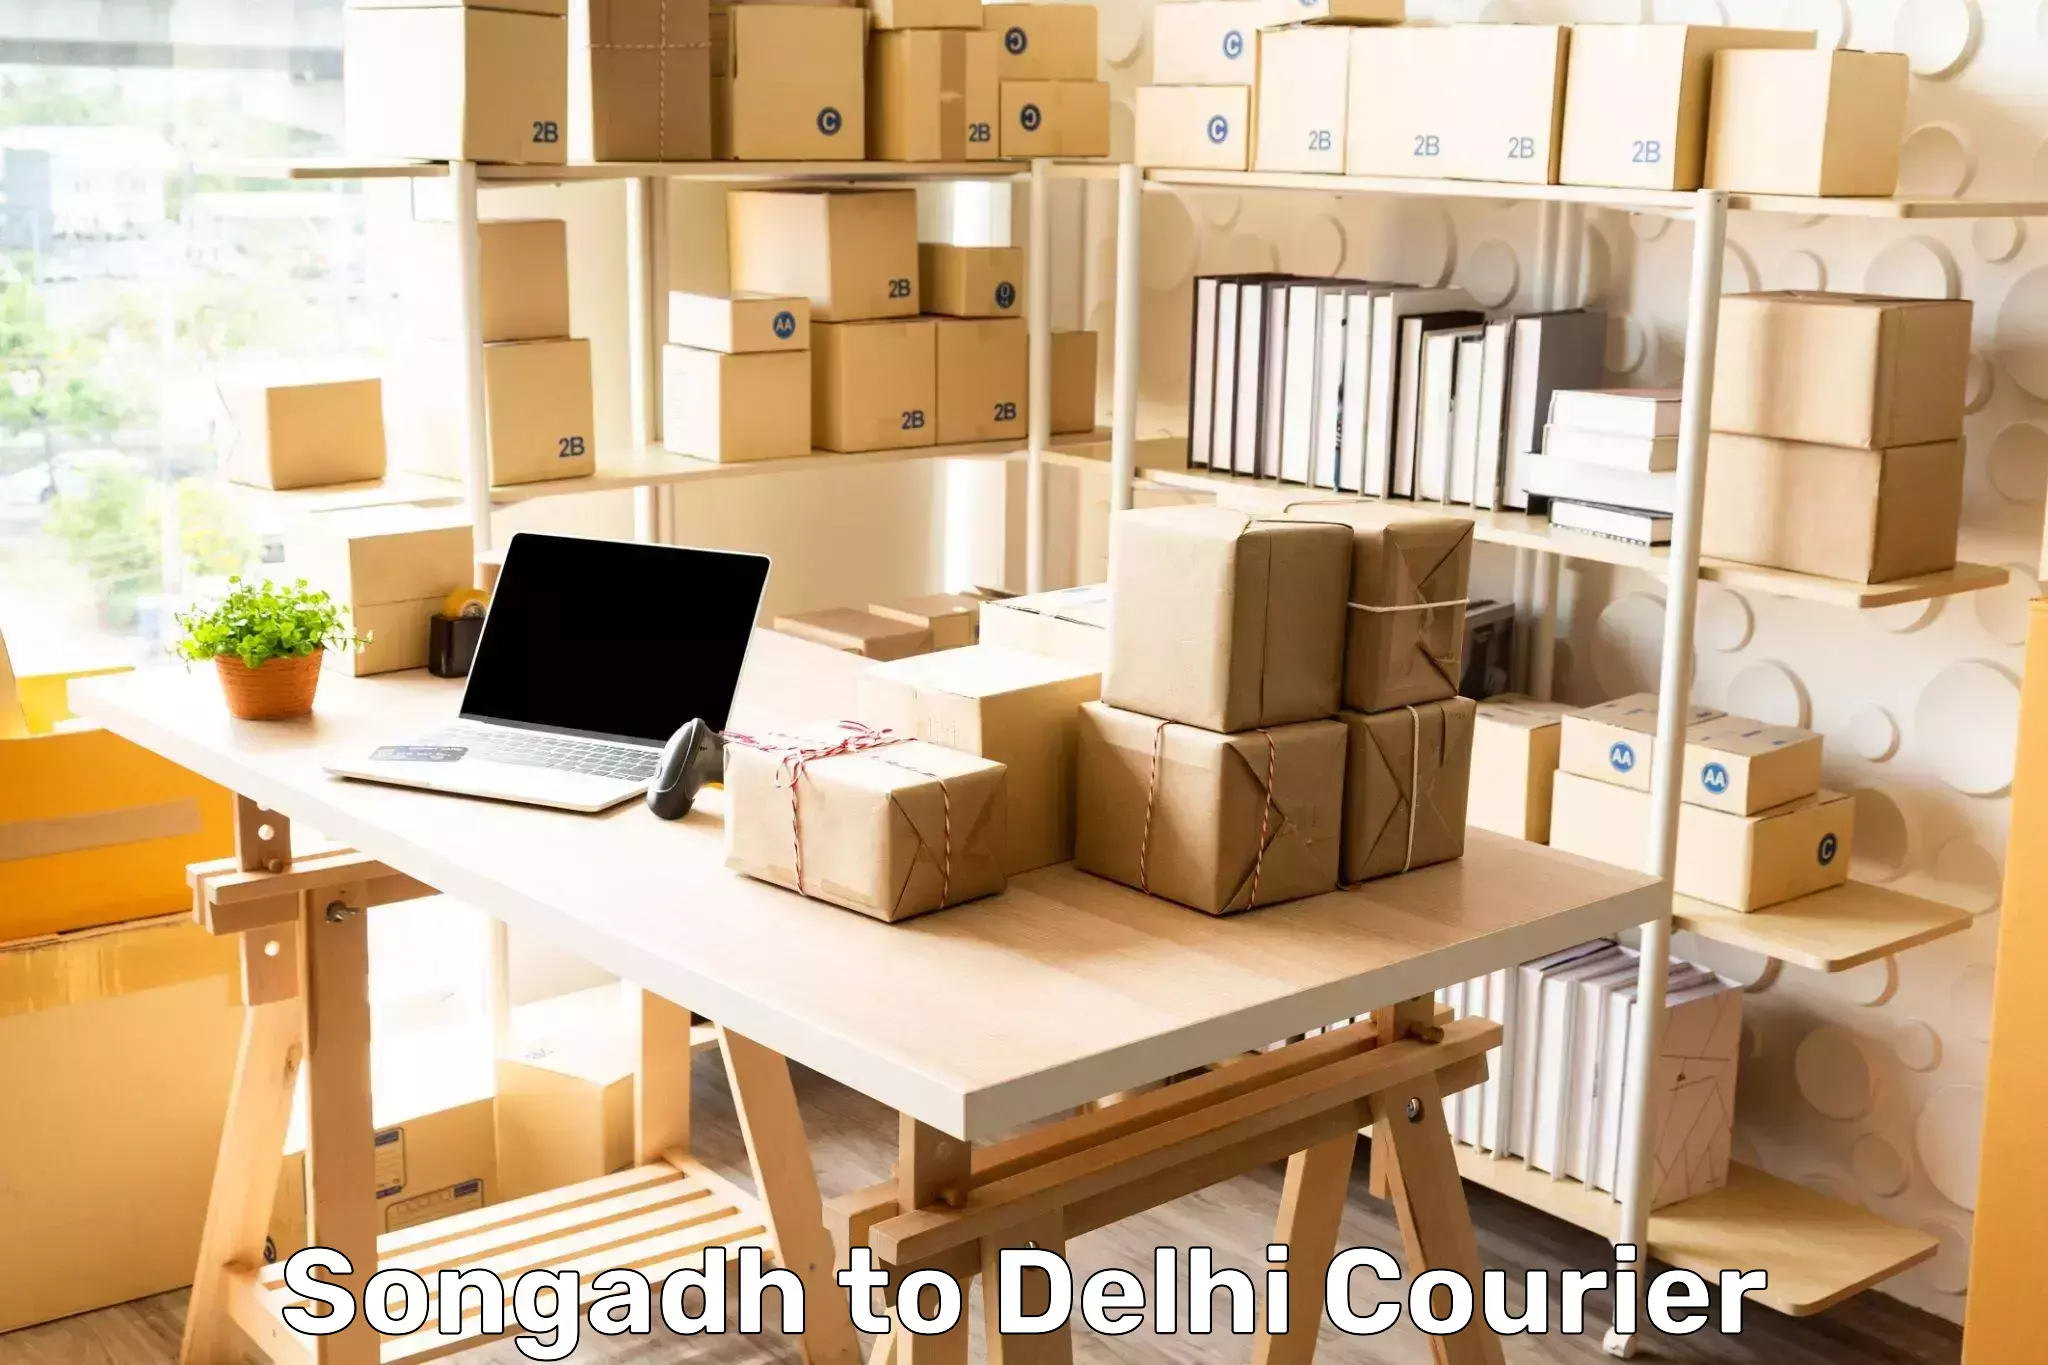 Business logistics support Songadh to Delhi